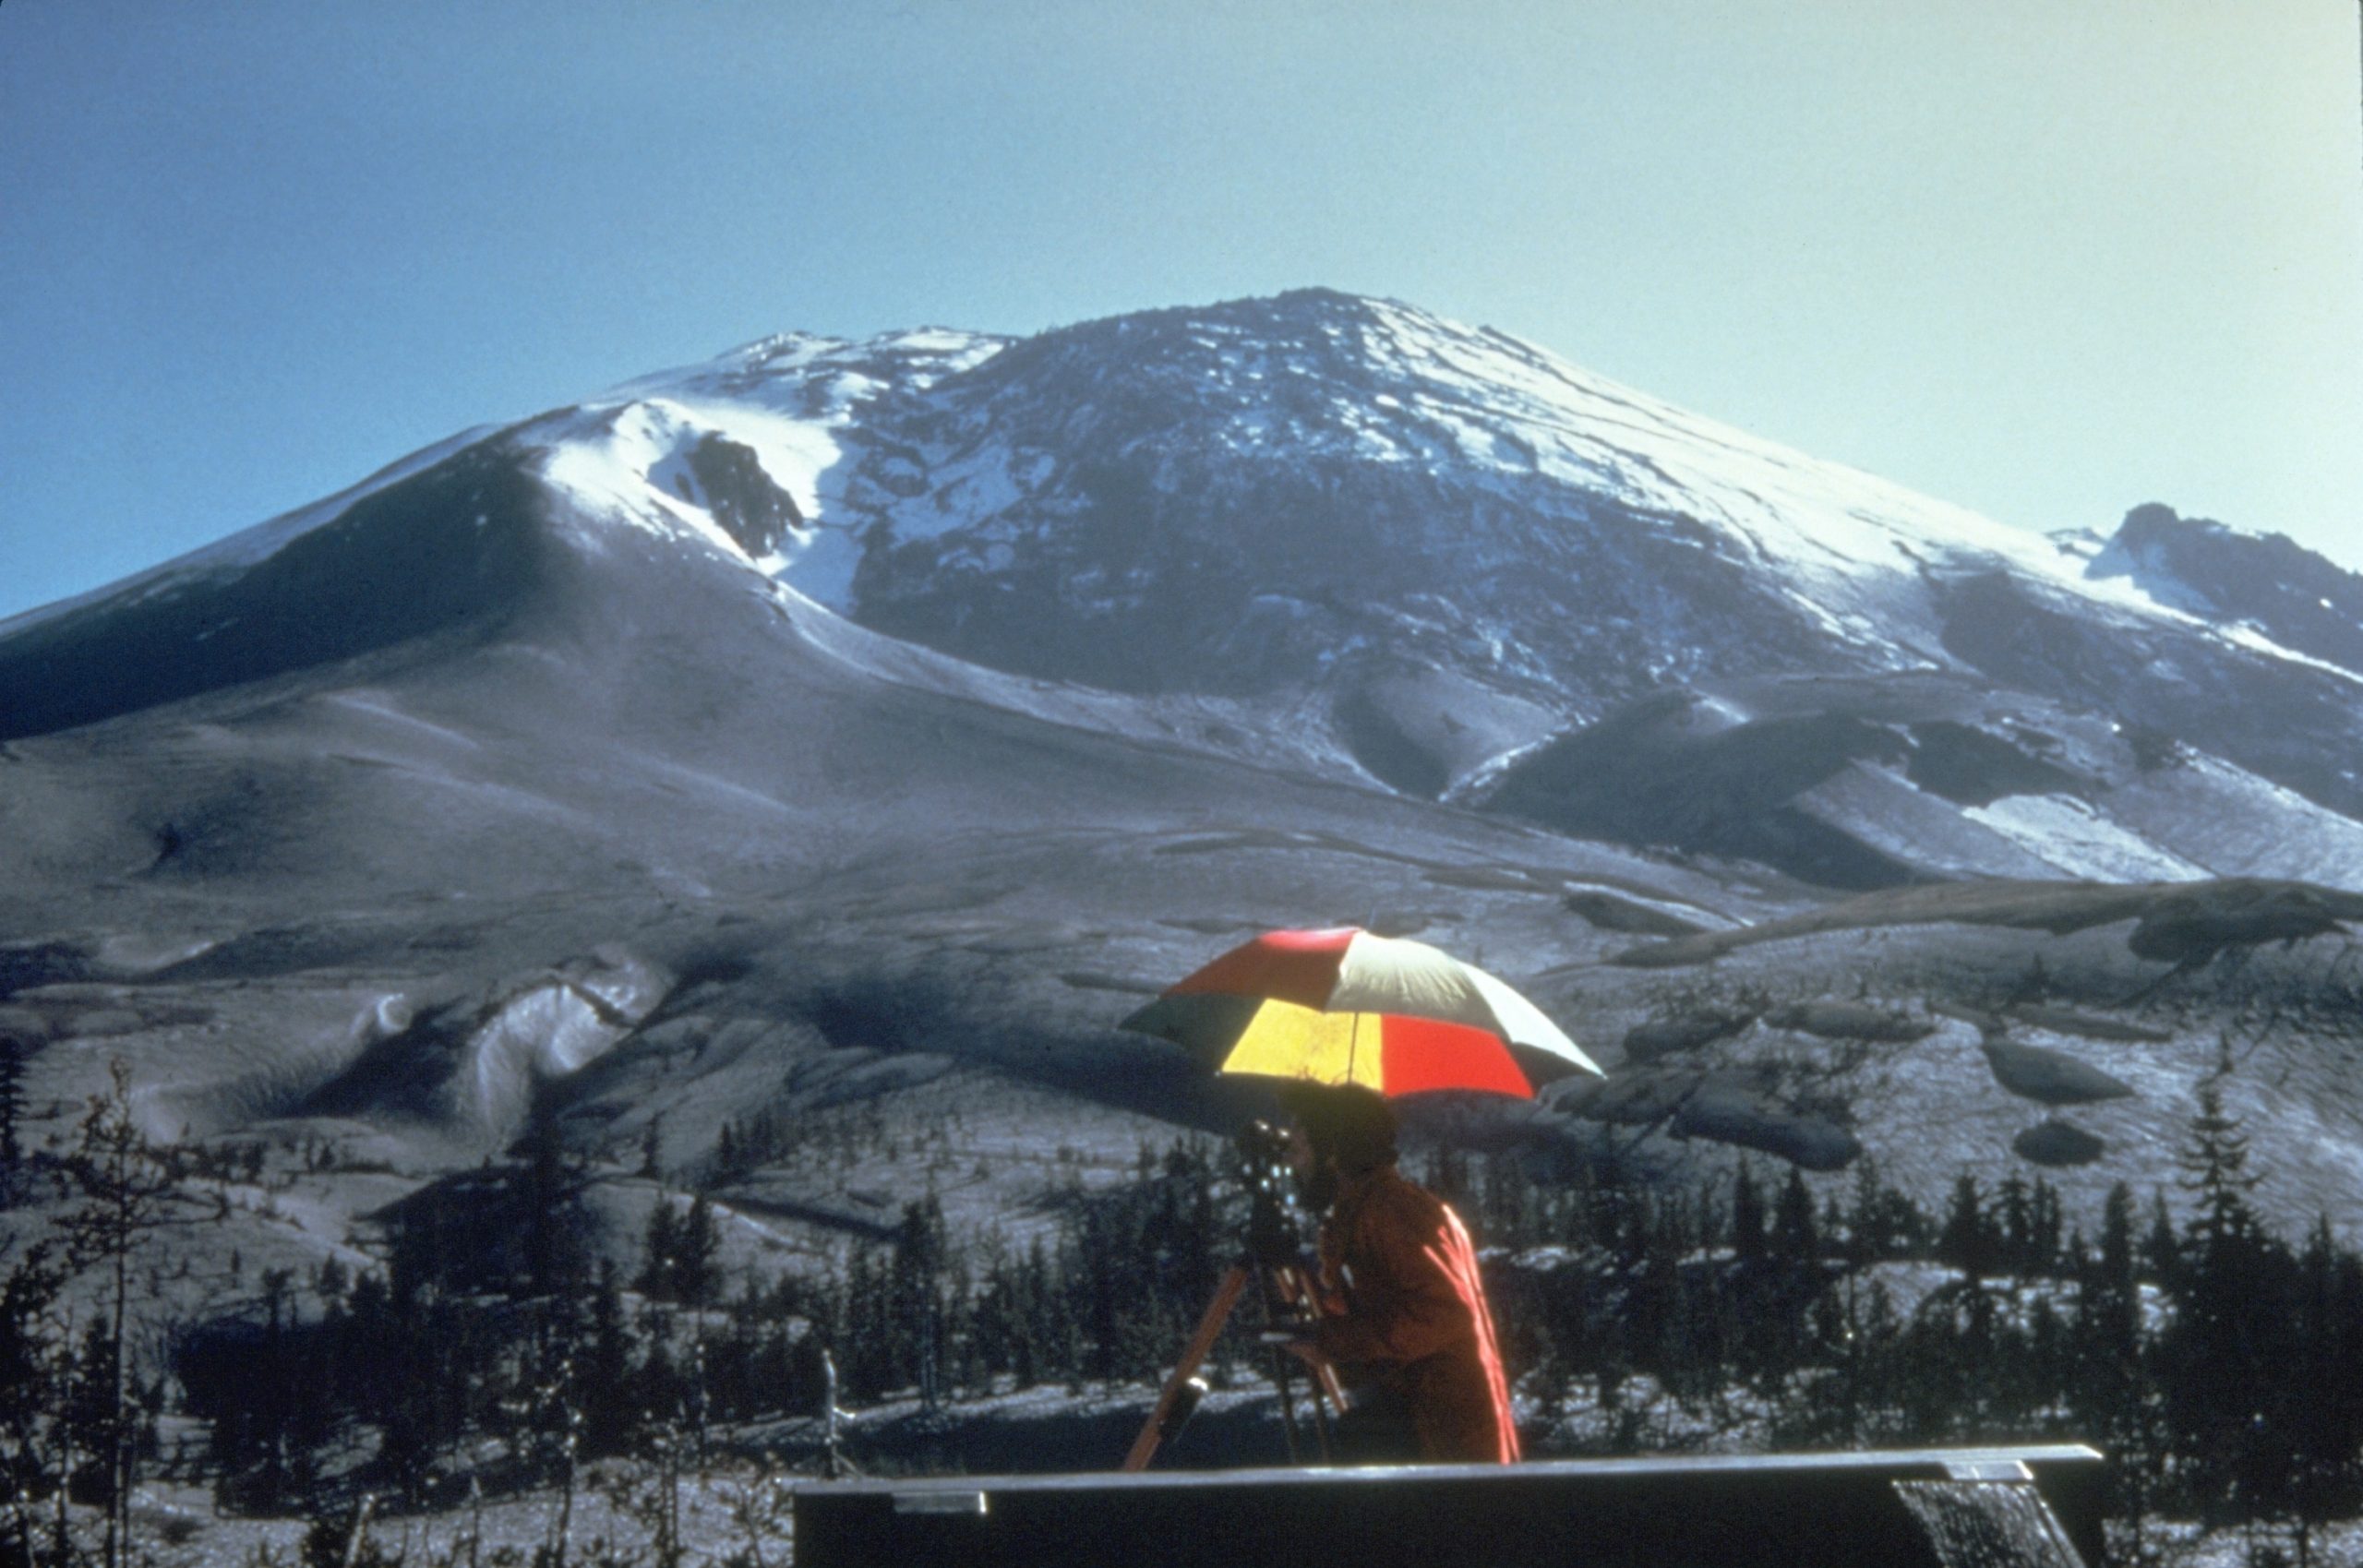 Mount St Helens' northern peak is bulged outward in 1980 before its massive eruption